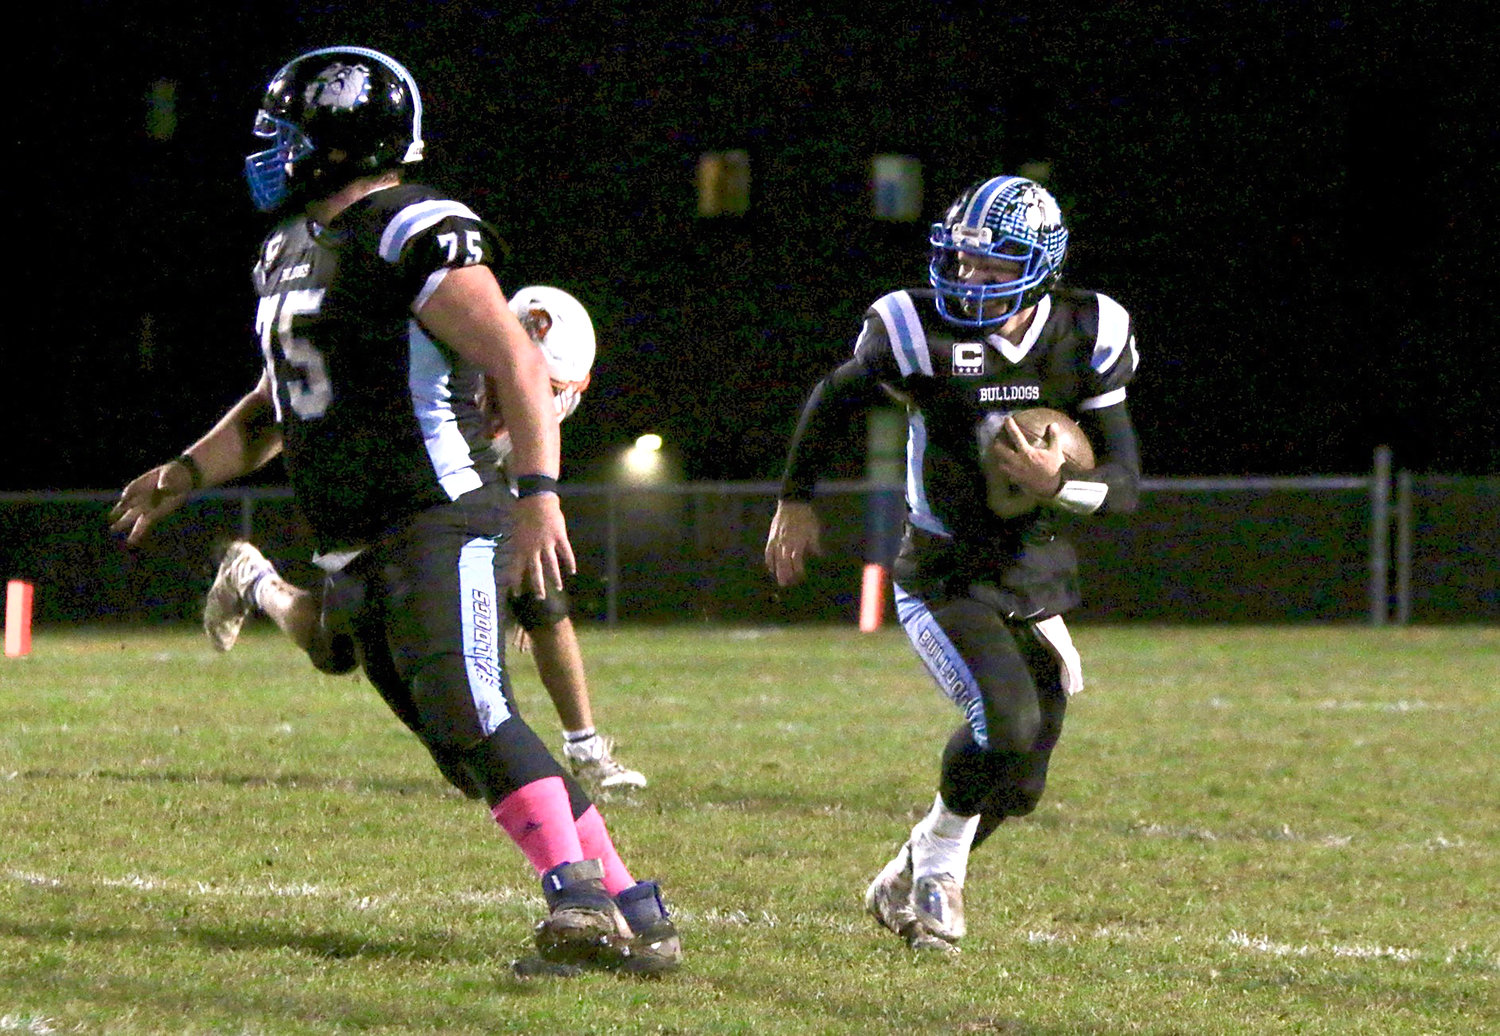 Senior quarterback Gavin Hauschild ran for three TD’s and threw for another in a break-out performance. He rushed for 150 yards. Here, he follows behind the awesome blocking of senior Chris Campanelli.